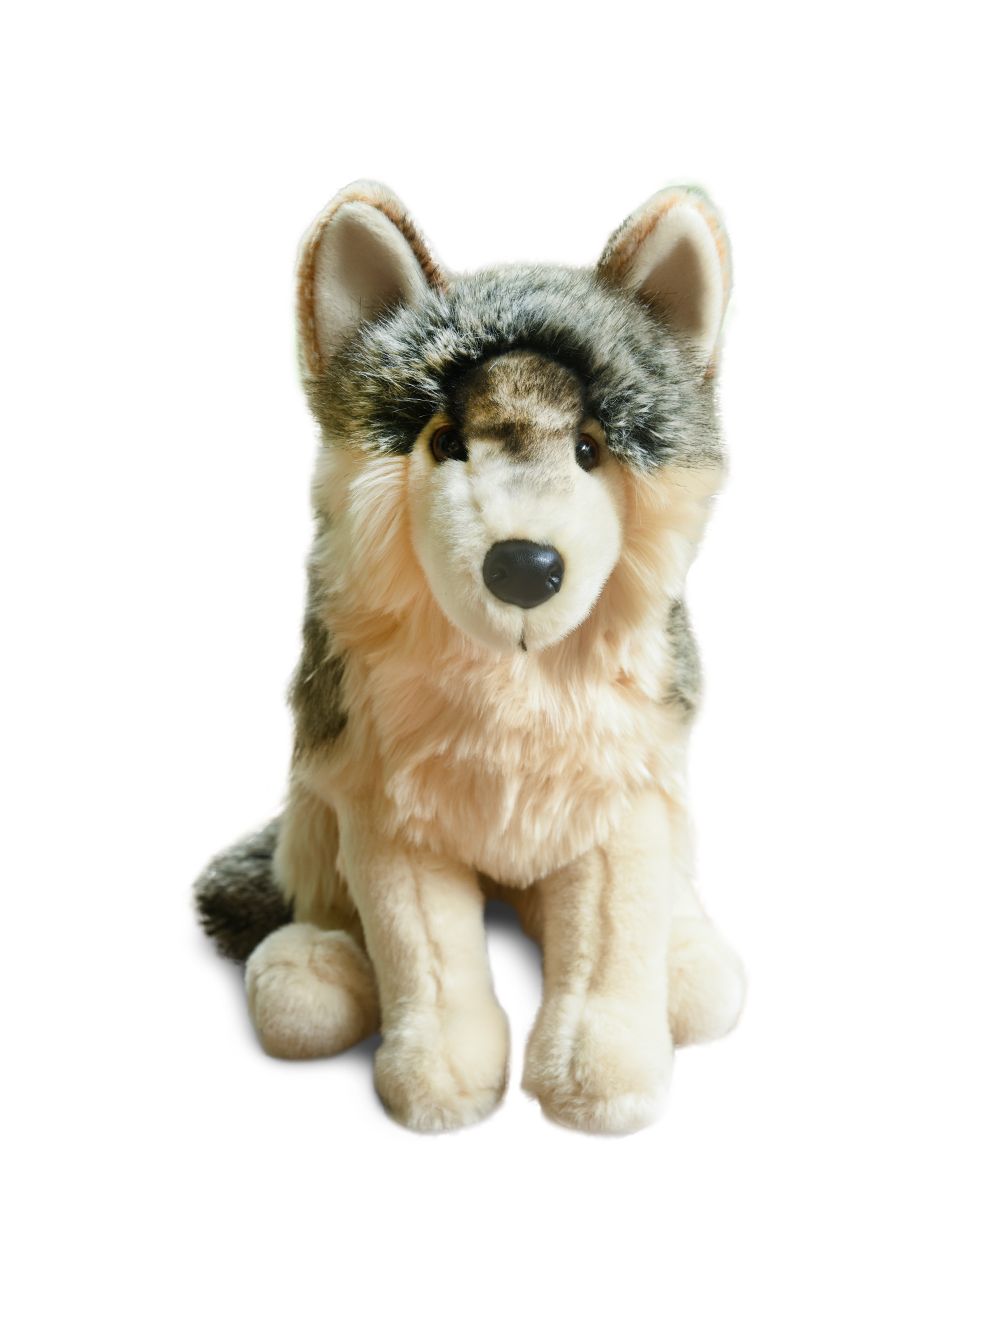 Yellowstone National Park Lodges Yellowstone Wolf Plush - The only official  in park lodging